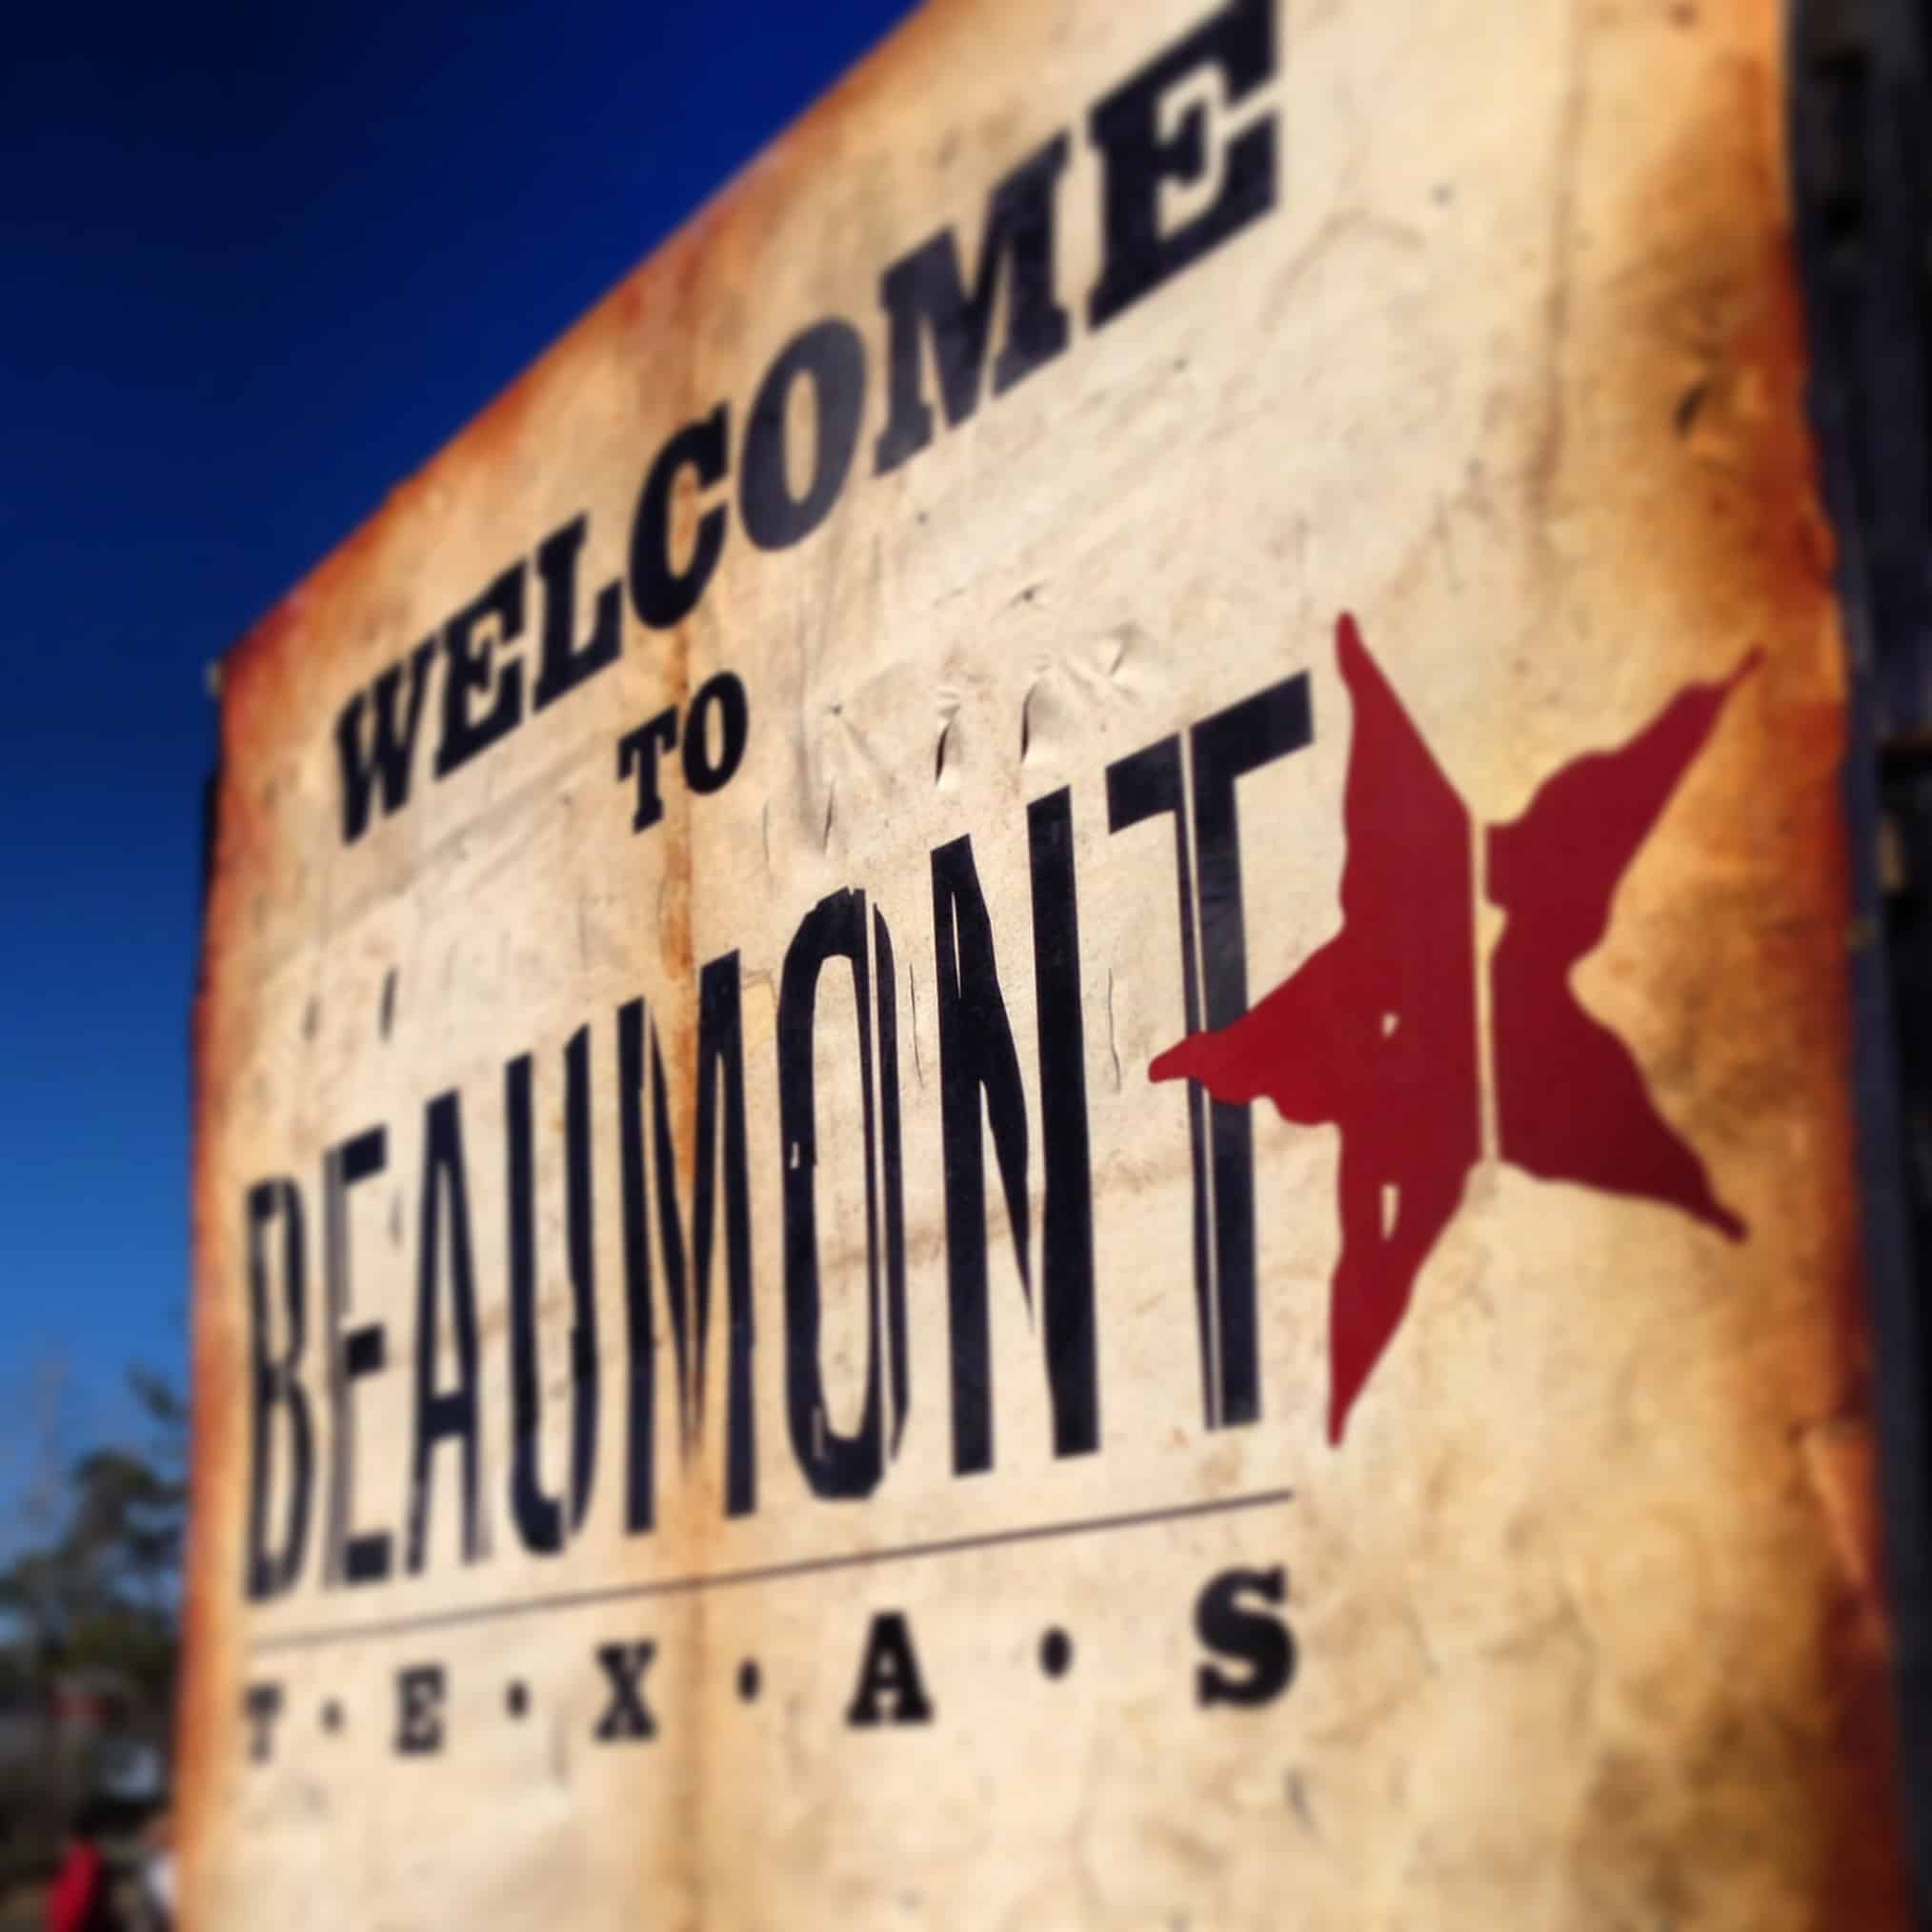 Things to do in Beaumont TX